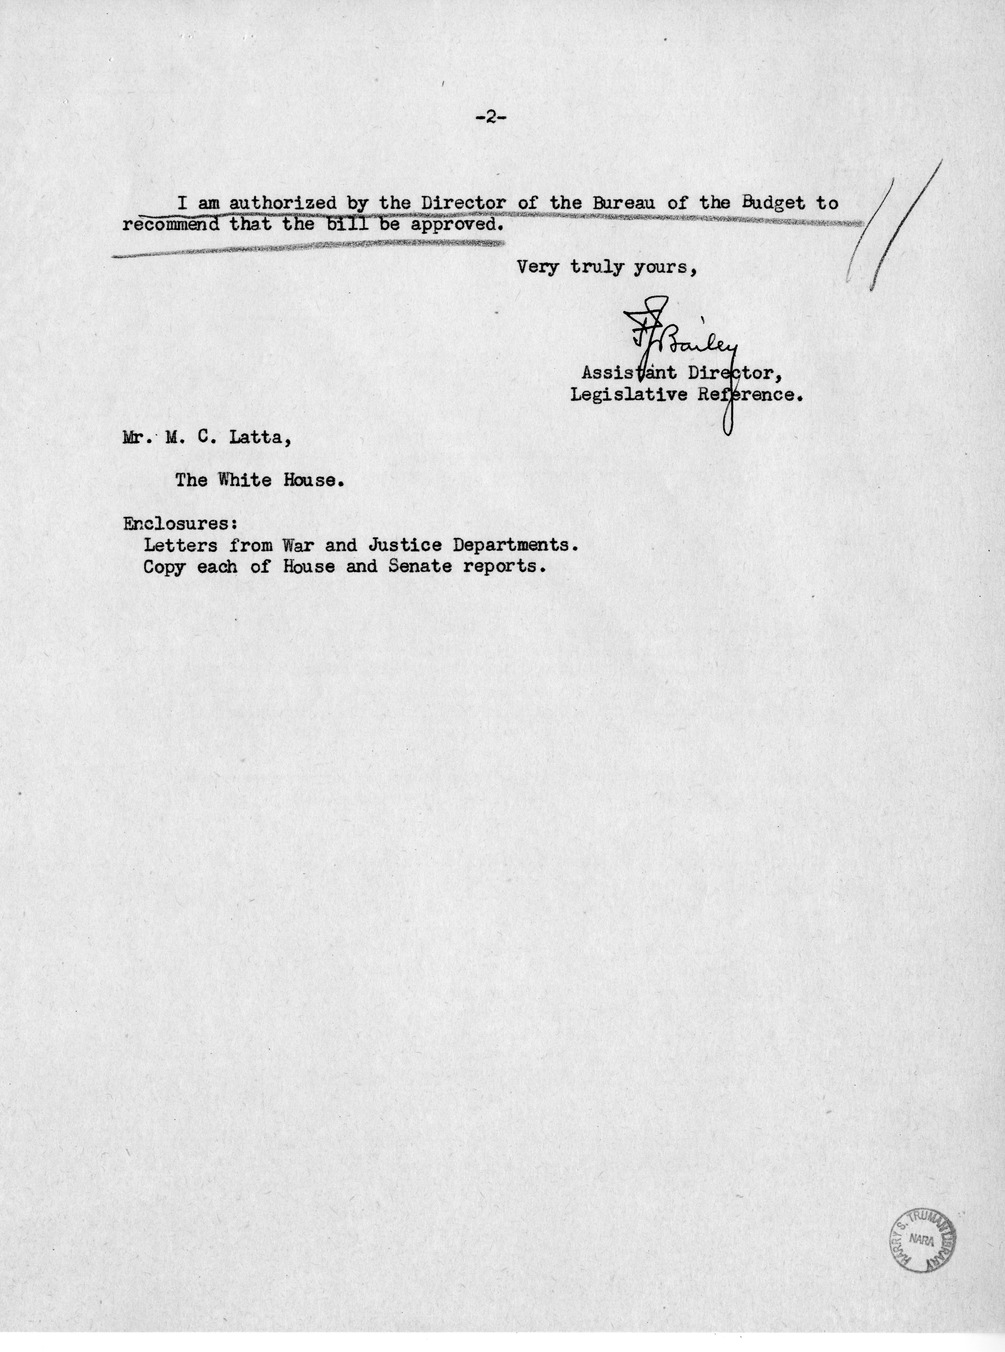 Memorandum from Frederick J. Bailey to M. C. Latta, H.R. 4018, For the Relief of Robert A. Hudson, with Attachments